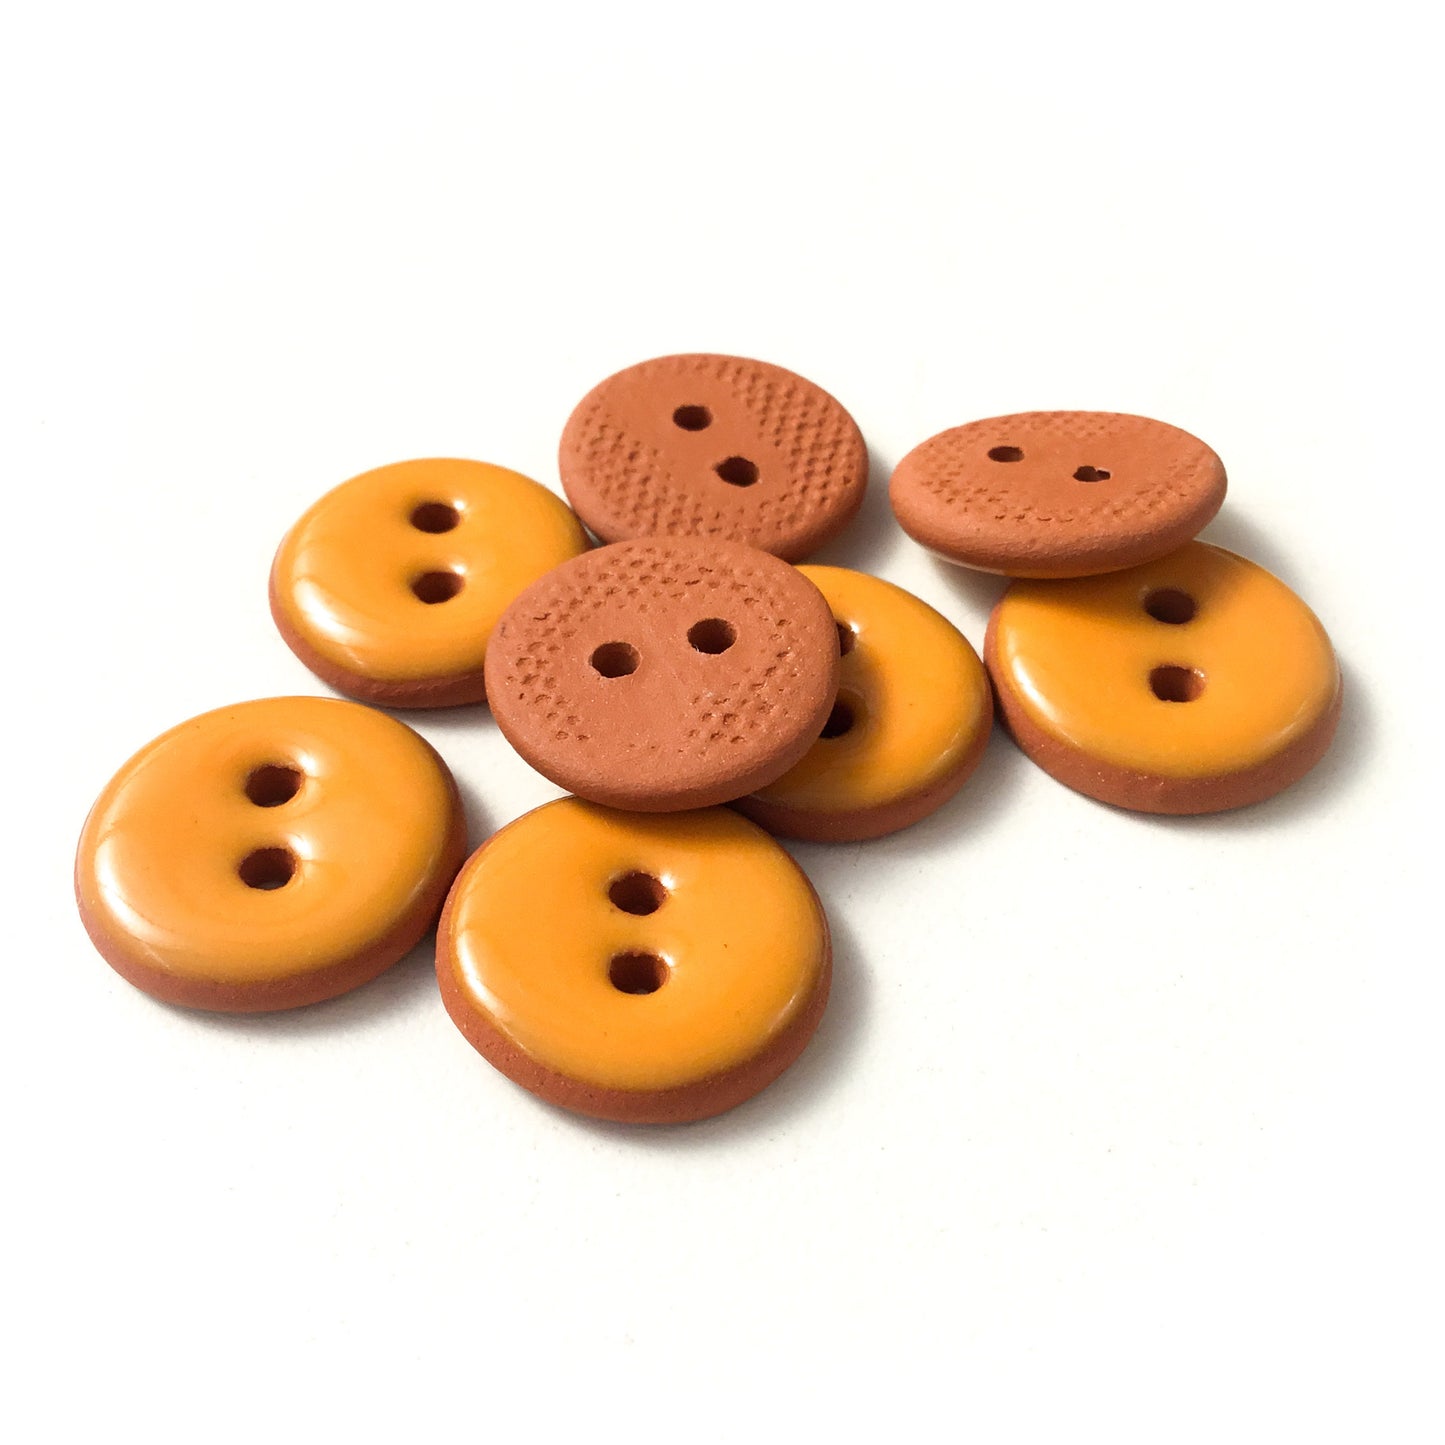 Bright Orange Ceramic Buttons on Red Clay - Round Ceramic Buttons - 11/16" - 8 Pack